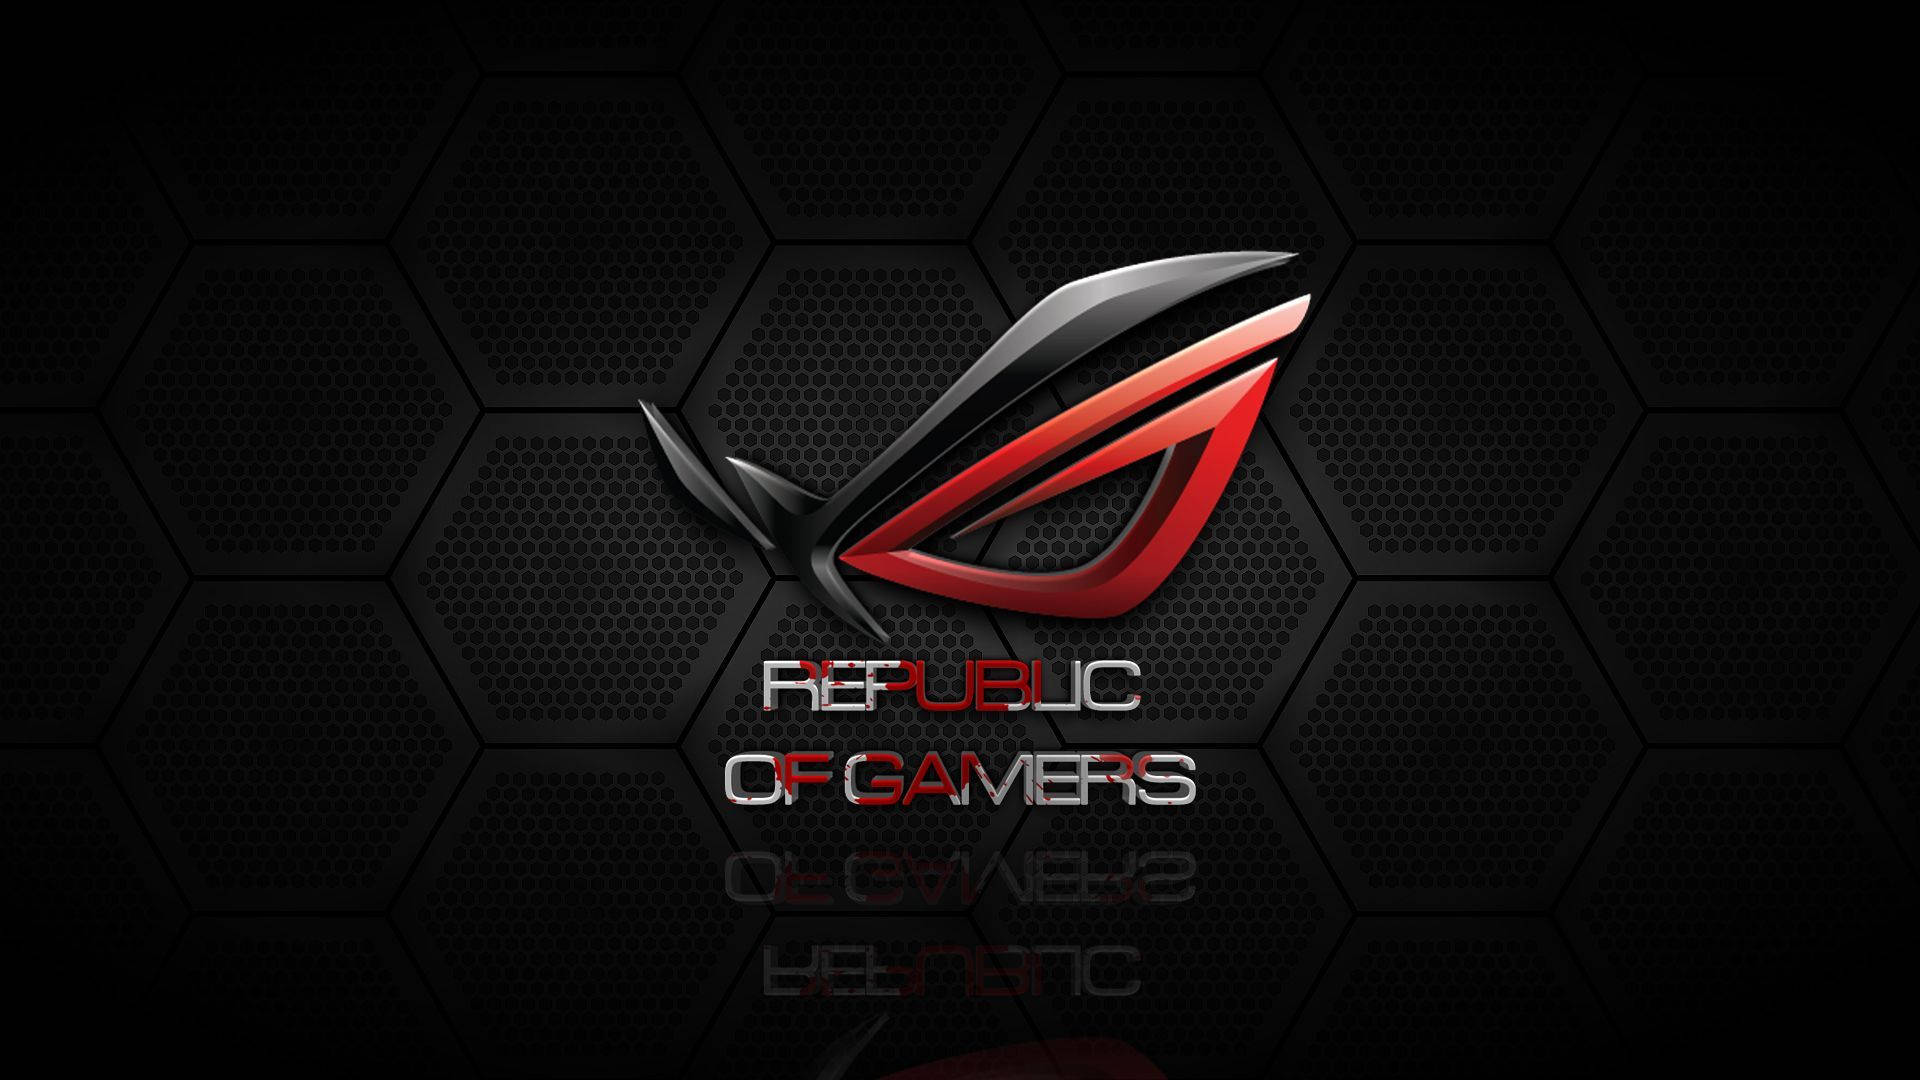 Rog Republic Of Gamers Background